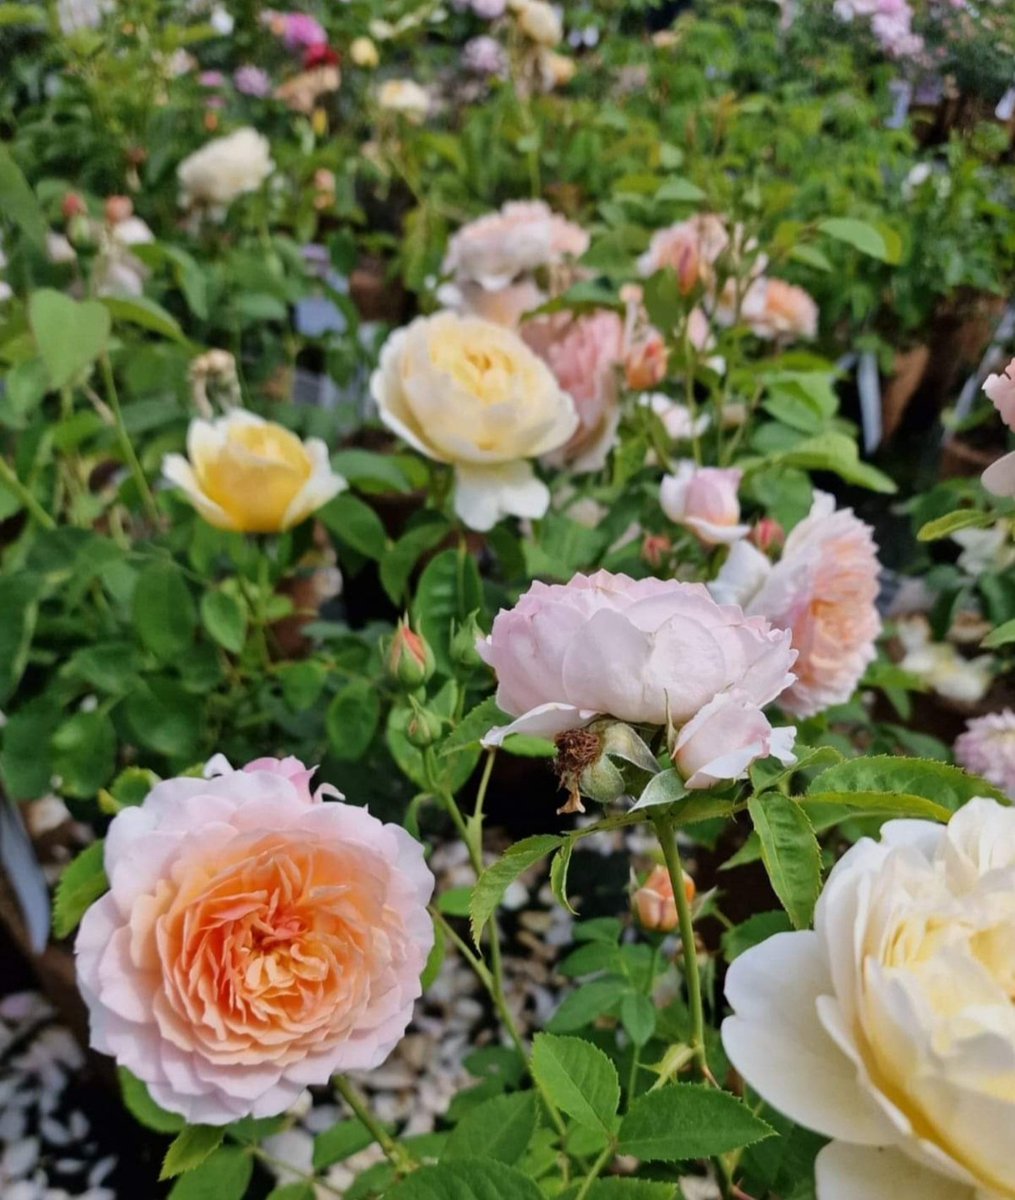 Love for Roses🌸🌼🤍
Peace & Happiness to all of you☀️
.
#angelasimonini #art #painter #artandroses #loveroses #loveforroses #englishgarden #garden #roses #rose #pinkroses #pink #orange #orangeroses #yellowroses #yellow #oldroses #beautyofroses #beauty #vintageroses #rosebouquet…